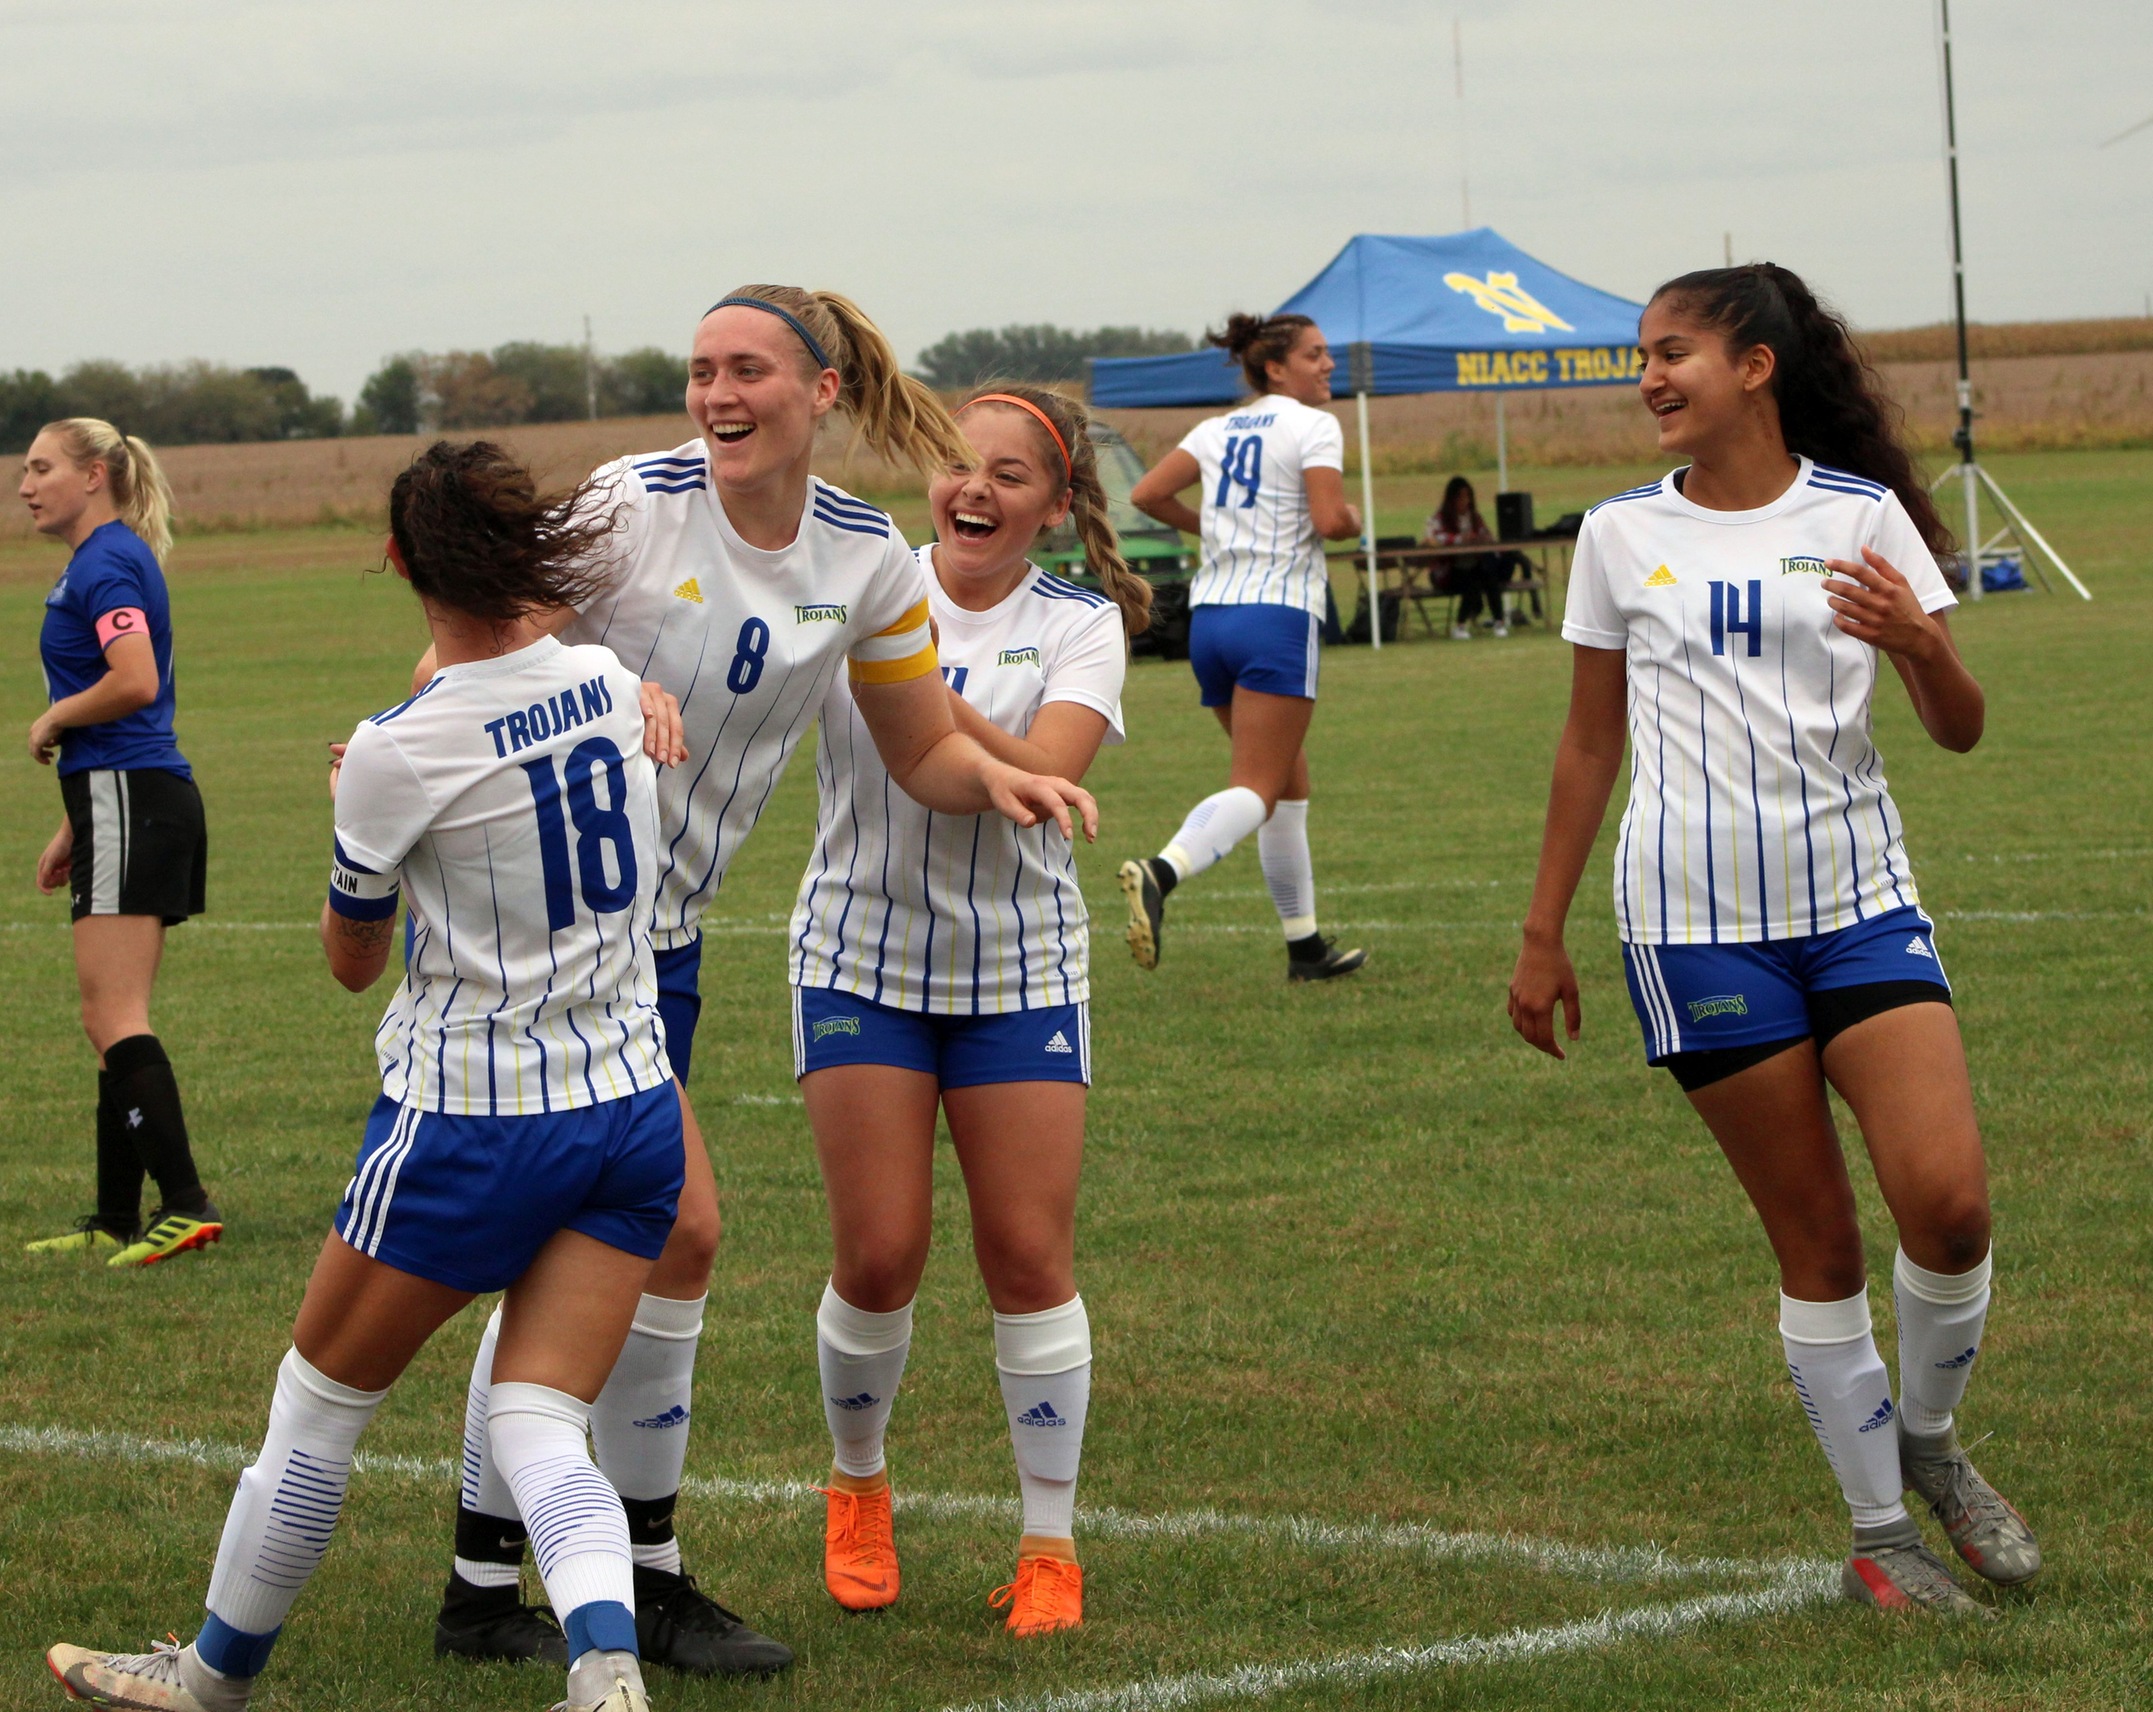 NIACC players celebrate Jette Busche's goal in the first half of Tuesday's match against DCTC.